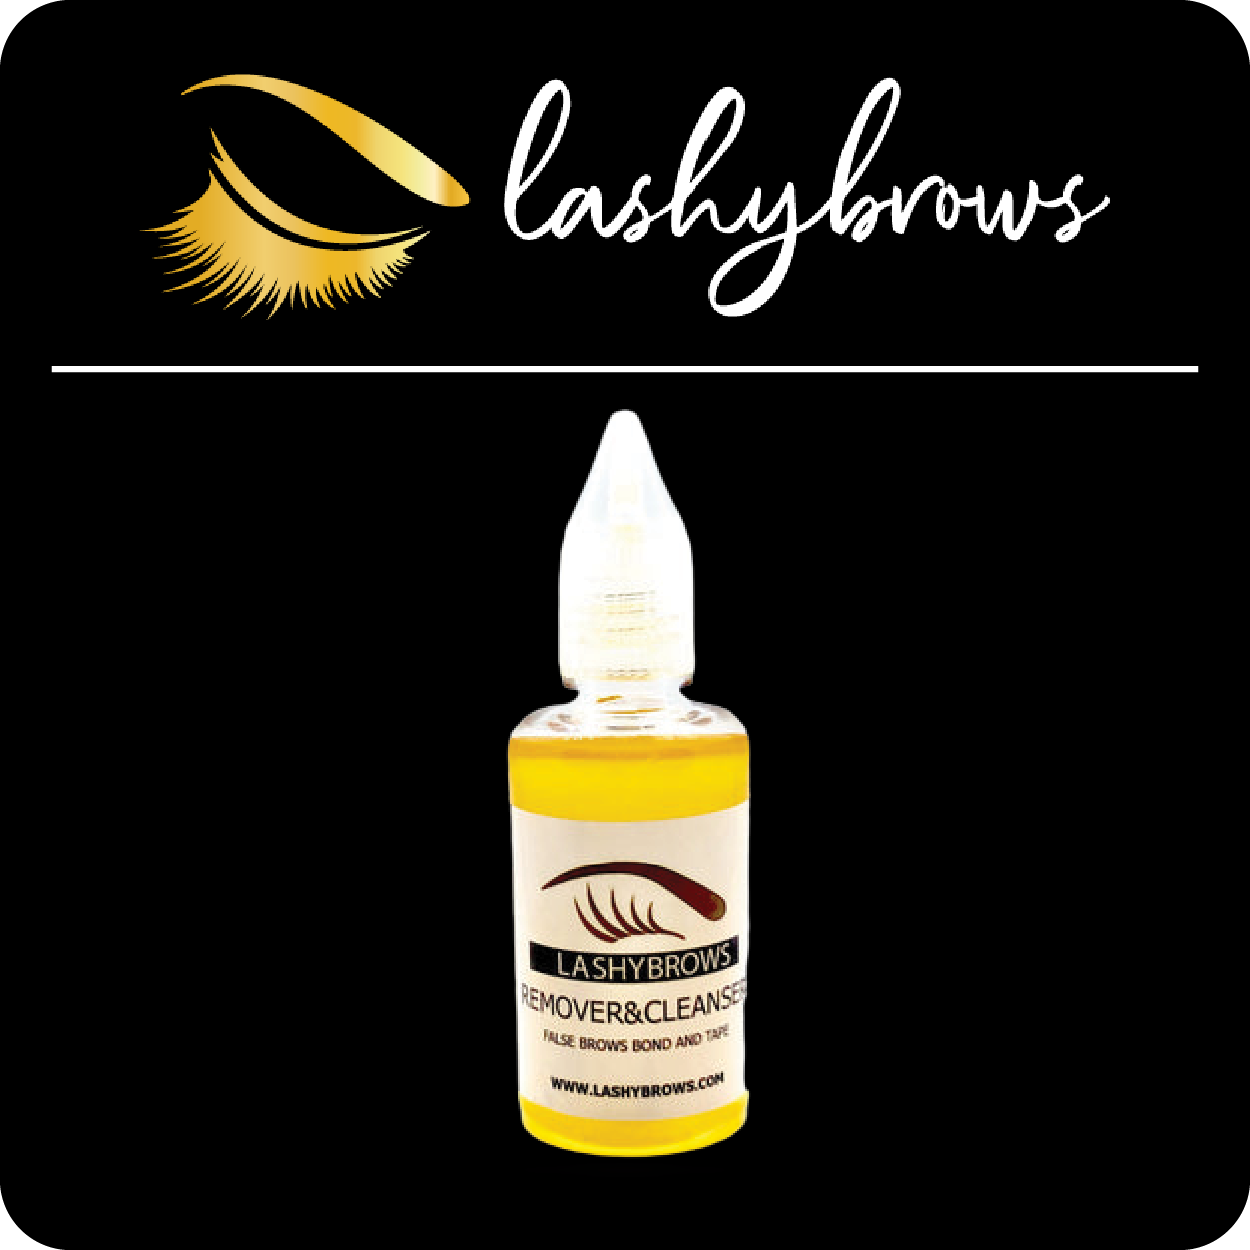 False Brow Cleanser & Remover by Lashybrows